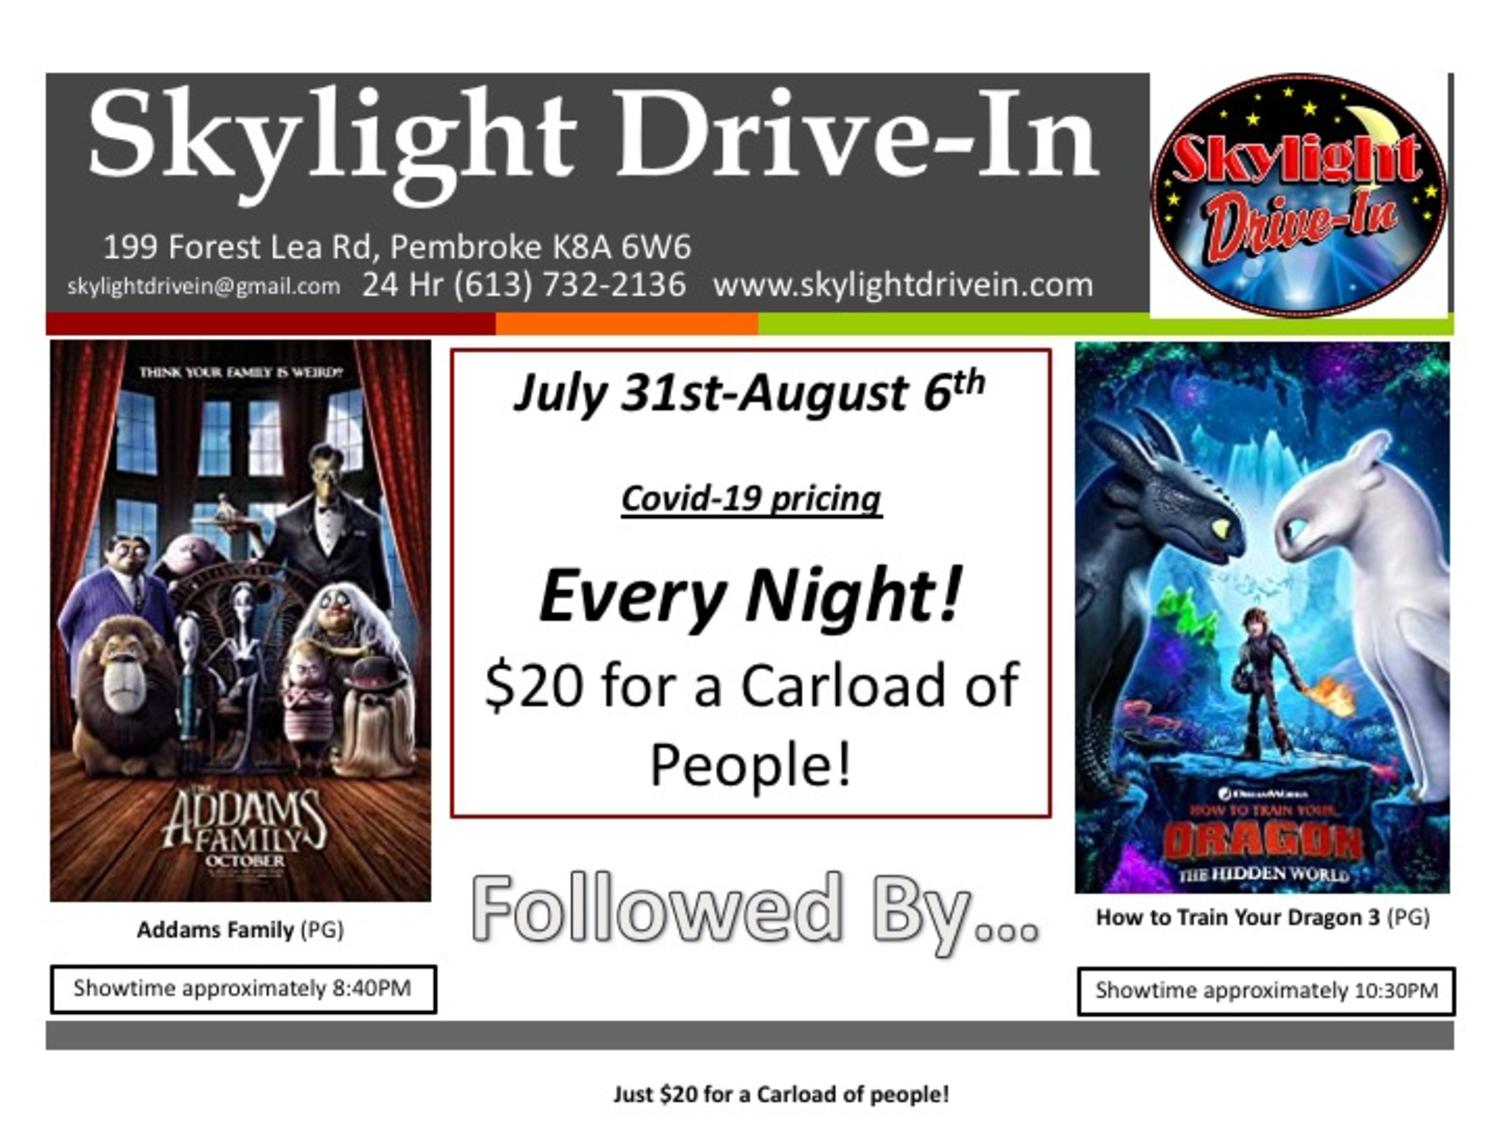 Skylight Drive-In featuring The Addams Family followed by  How To Train Your Dragon: The Hidden World